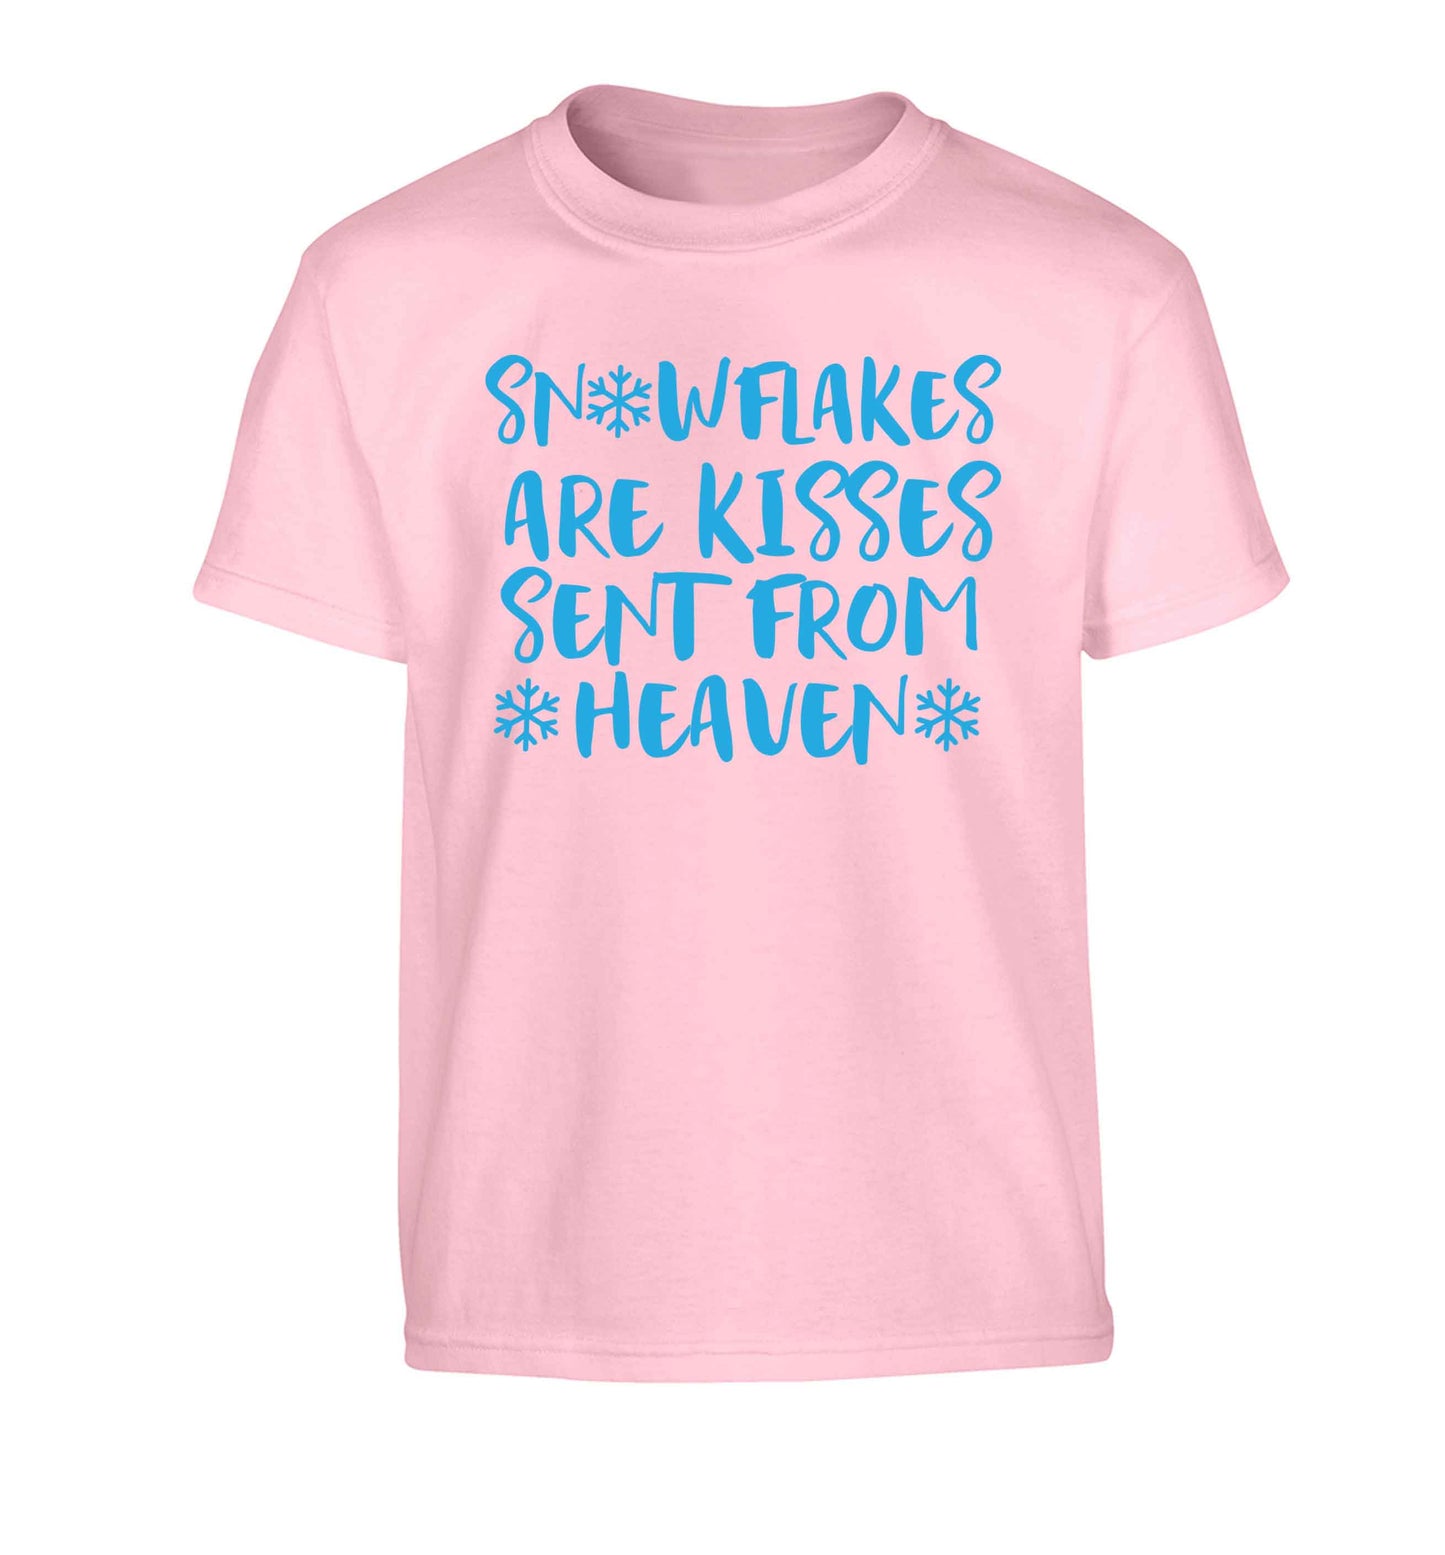 Snowflakes are kisses sent from heaven Children's light pink Tshirt 12-13 Years